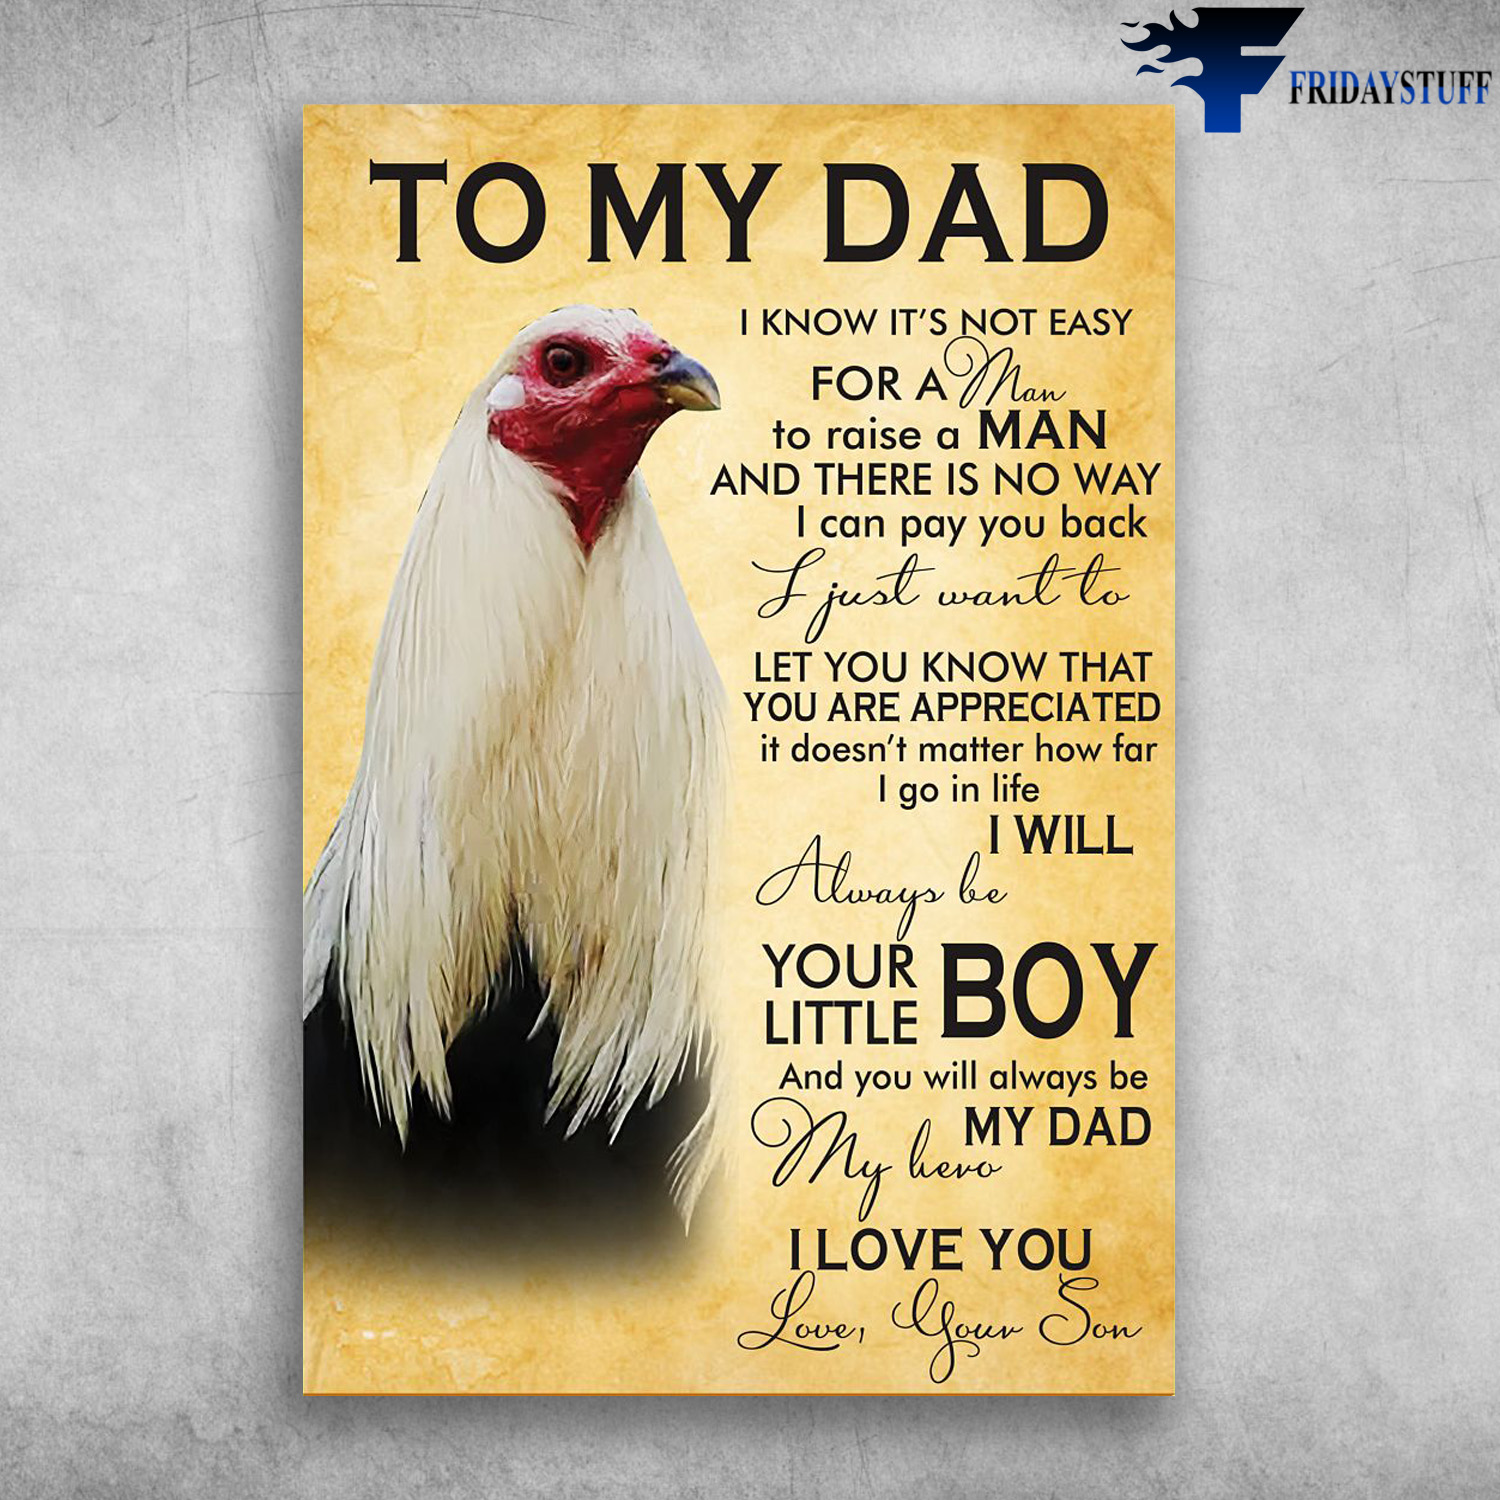 Chicken To My Dad - To My Dad, I Know It’s Not Easy For A Man, To Raise A Child And There Is No Way, I Can Pay You Back, I Just Want To Let You Know That You Are Appreciated, It Doesn’t Matter How Far I Go In Life, I Will Always Be Your Little Boy